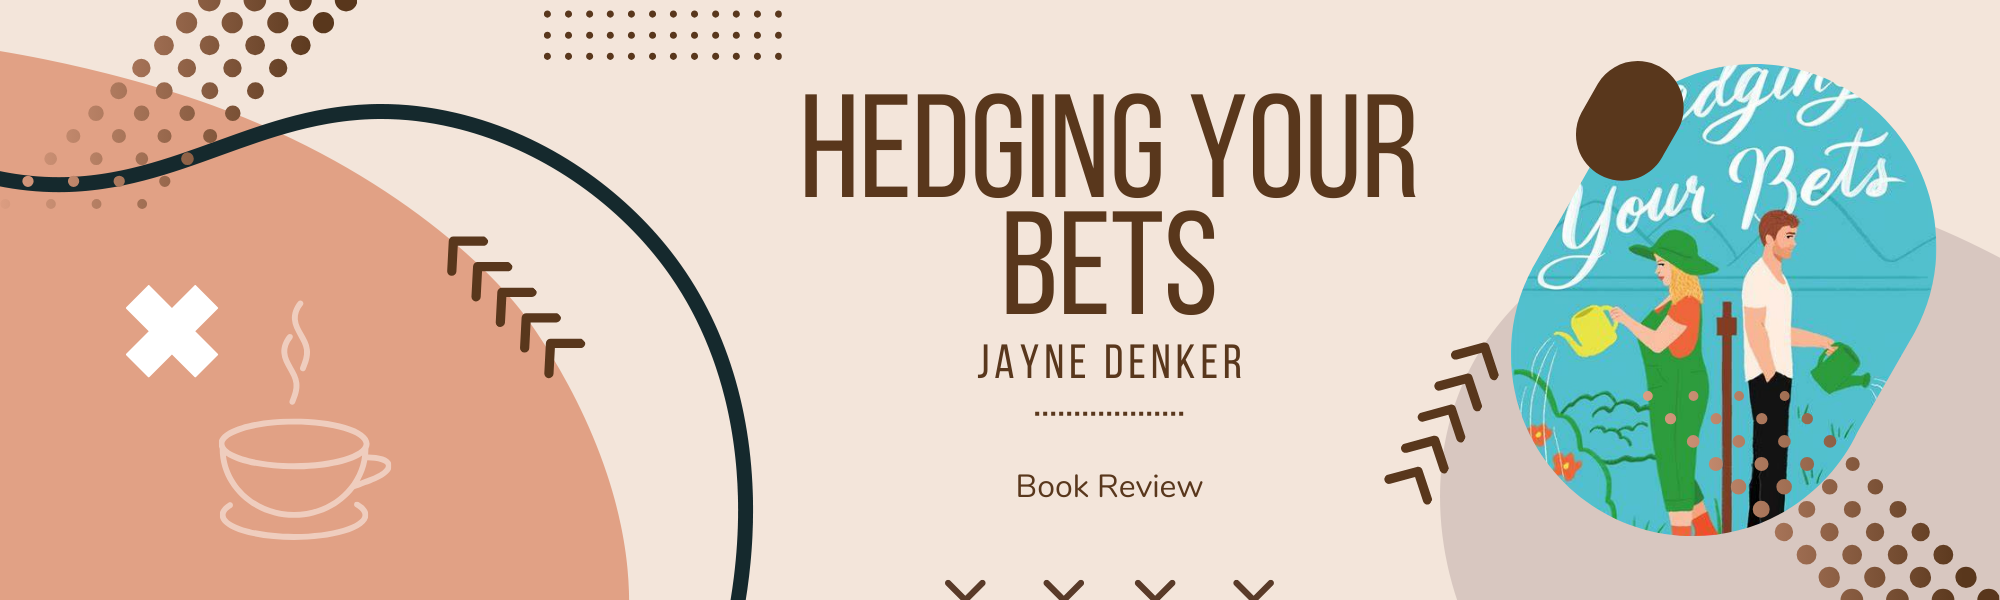 Book Review – ‘Hedging Your Bets’ by Jayne Denker